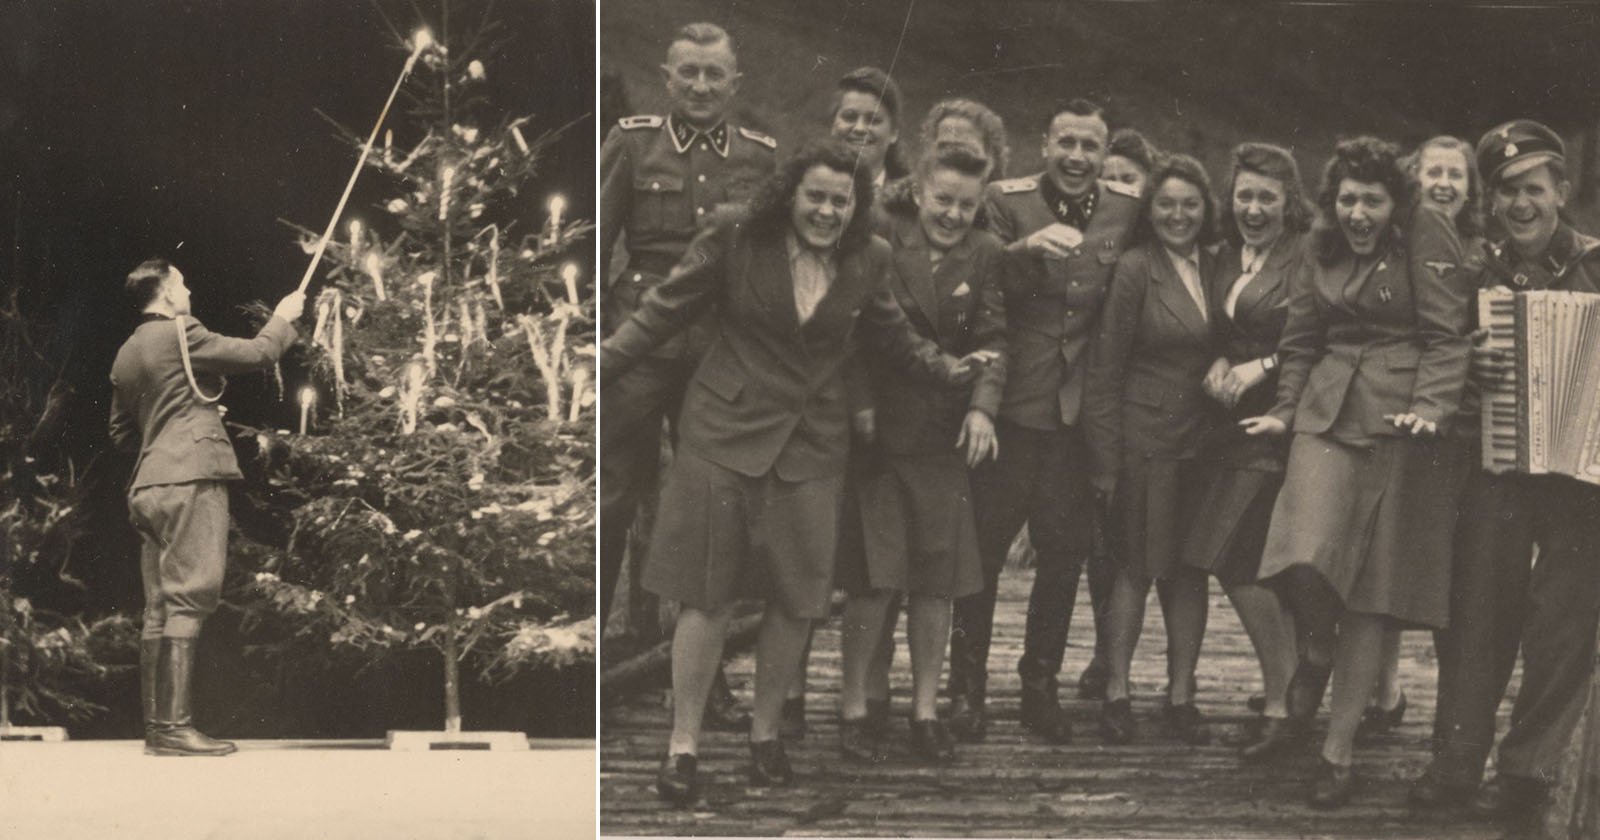 A Nazi’s Chilling Photos Show How He Wanted to Remember Auschwitz | PetaPixel